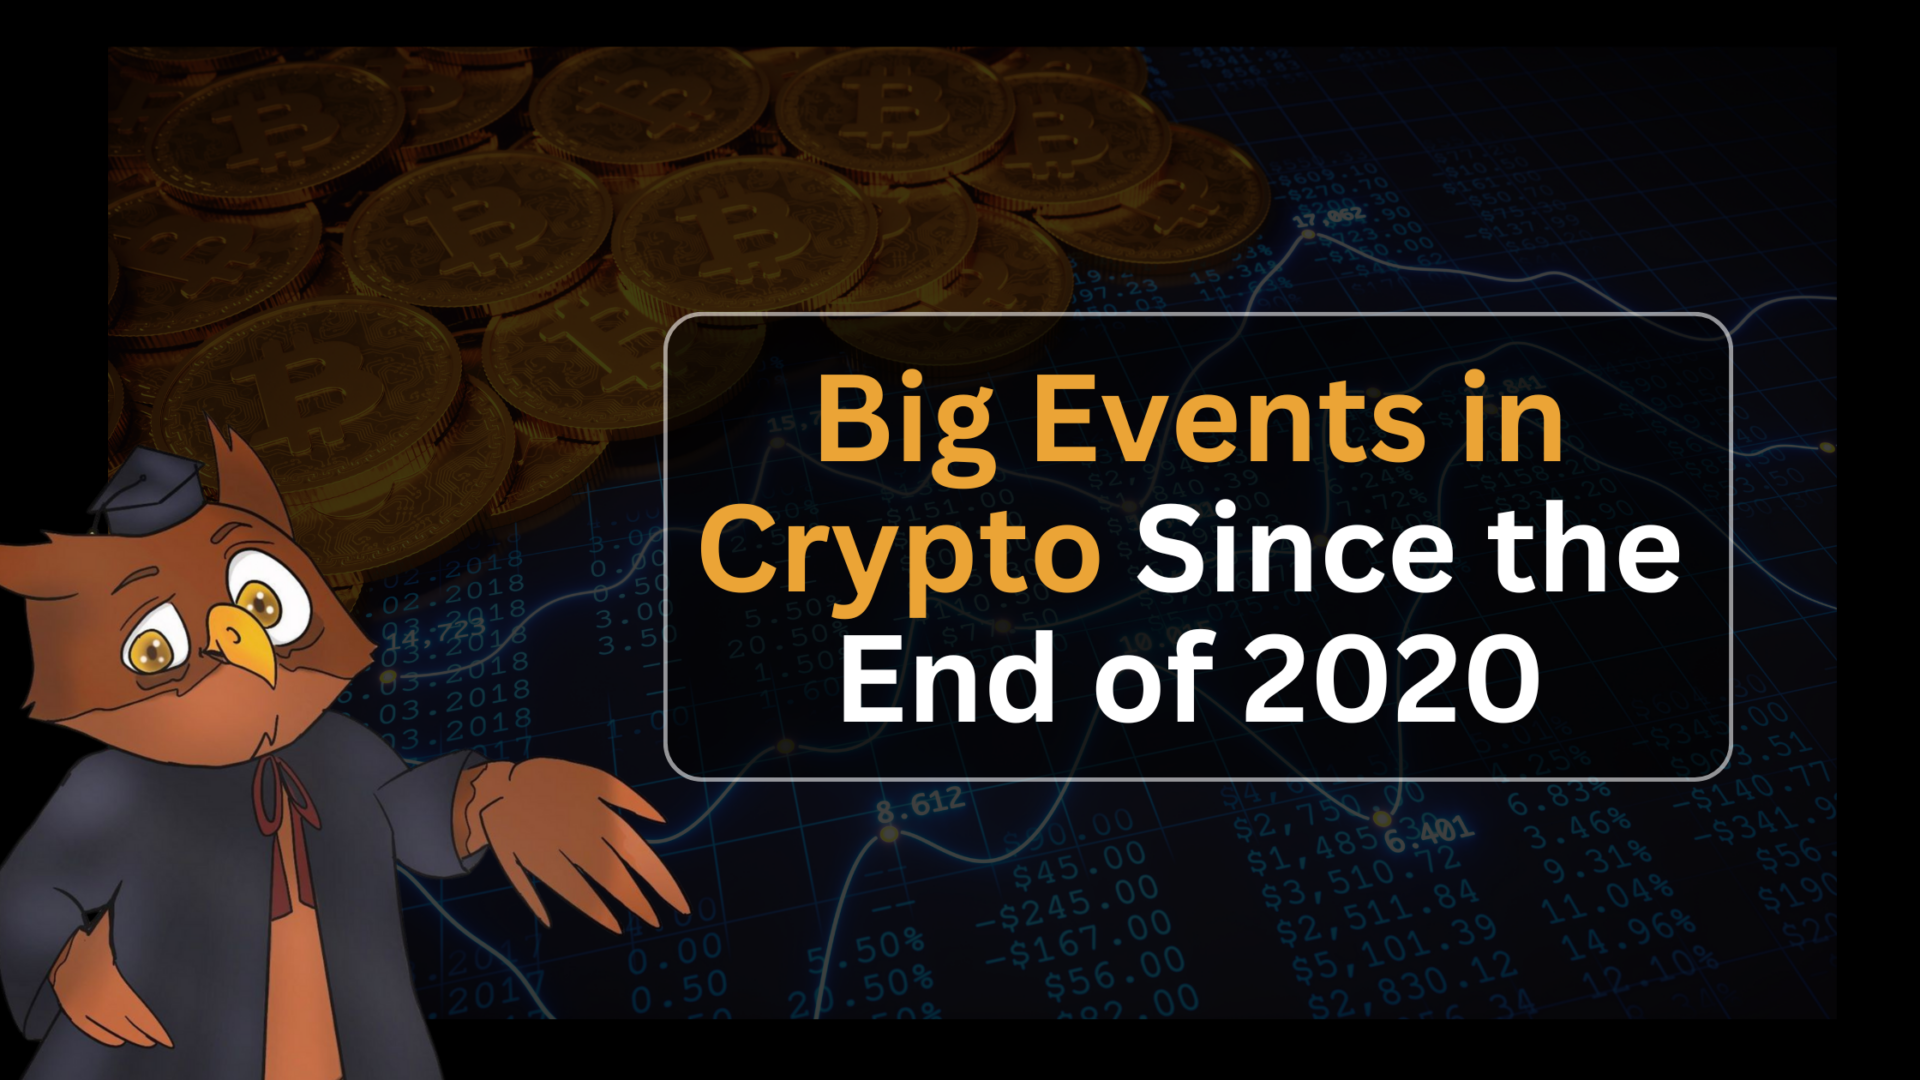 From NFT record sales and crypto all-time highs to dramatic collapses and regulatory scrutiny, discover all the major events of crypto since early 2021.